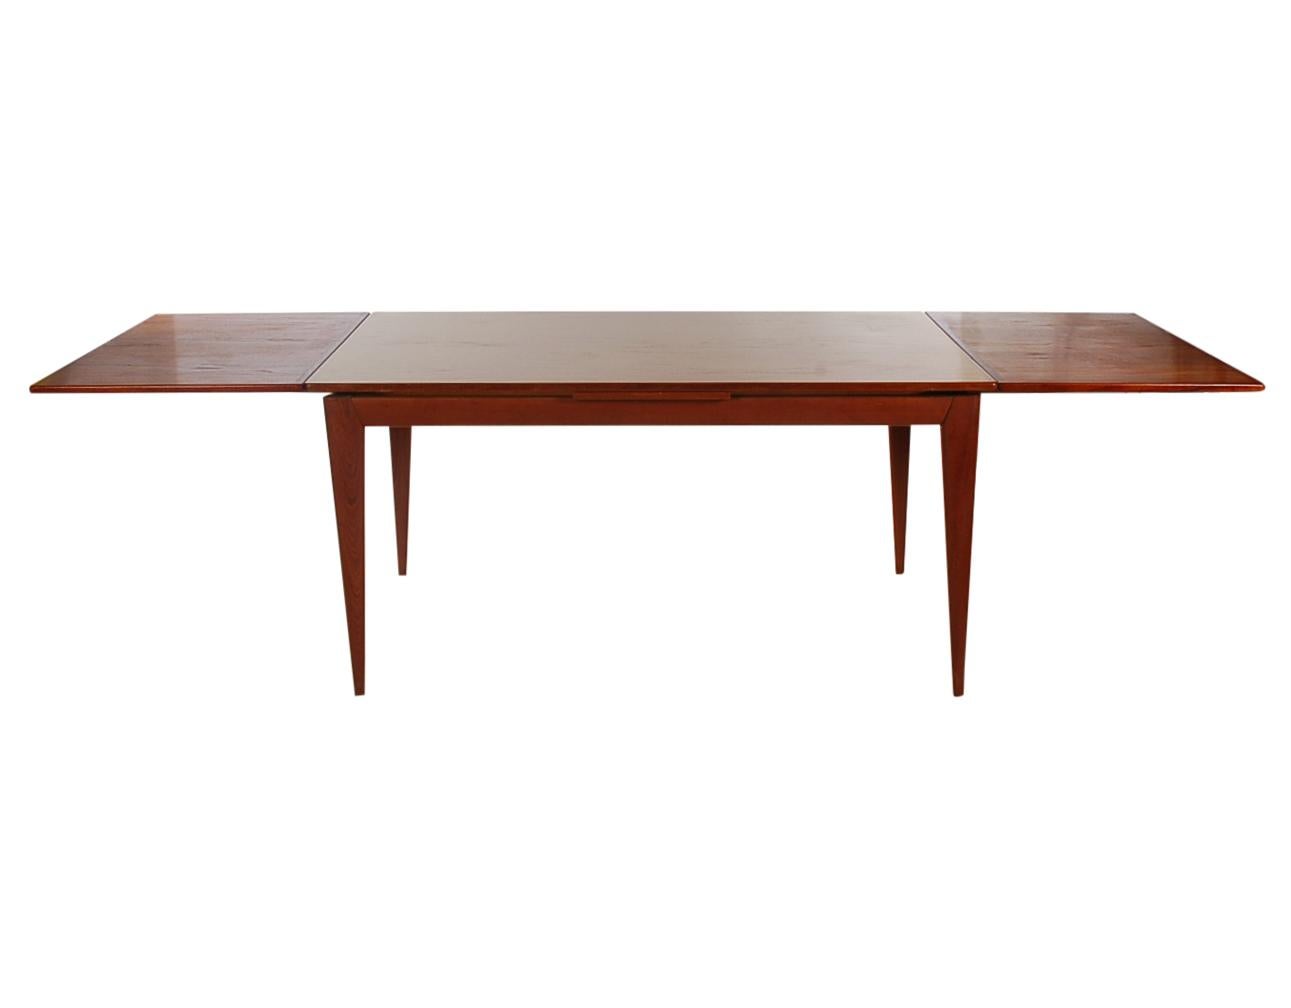 Mid-20th Century Midcentury Danish Modern Extendable Dining Table in Teak by Niels Otto Møller